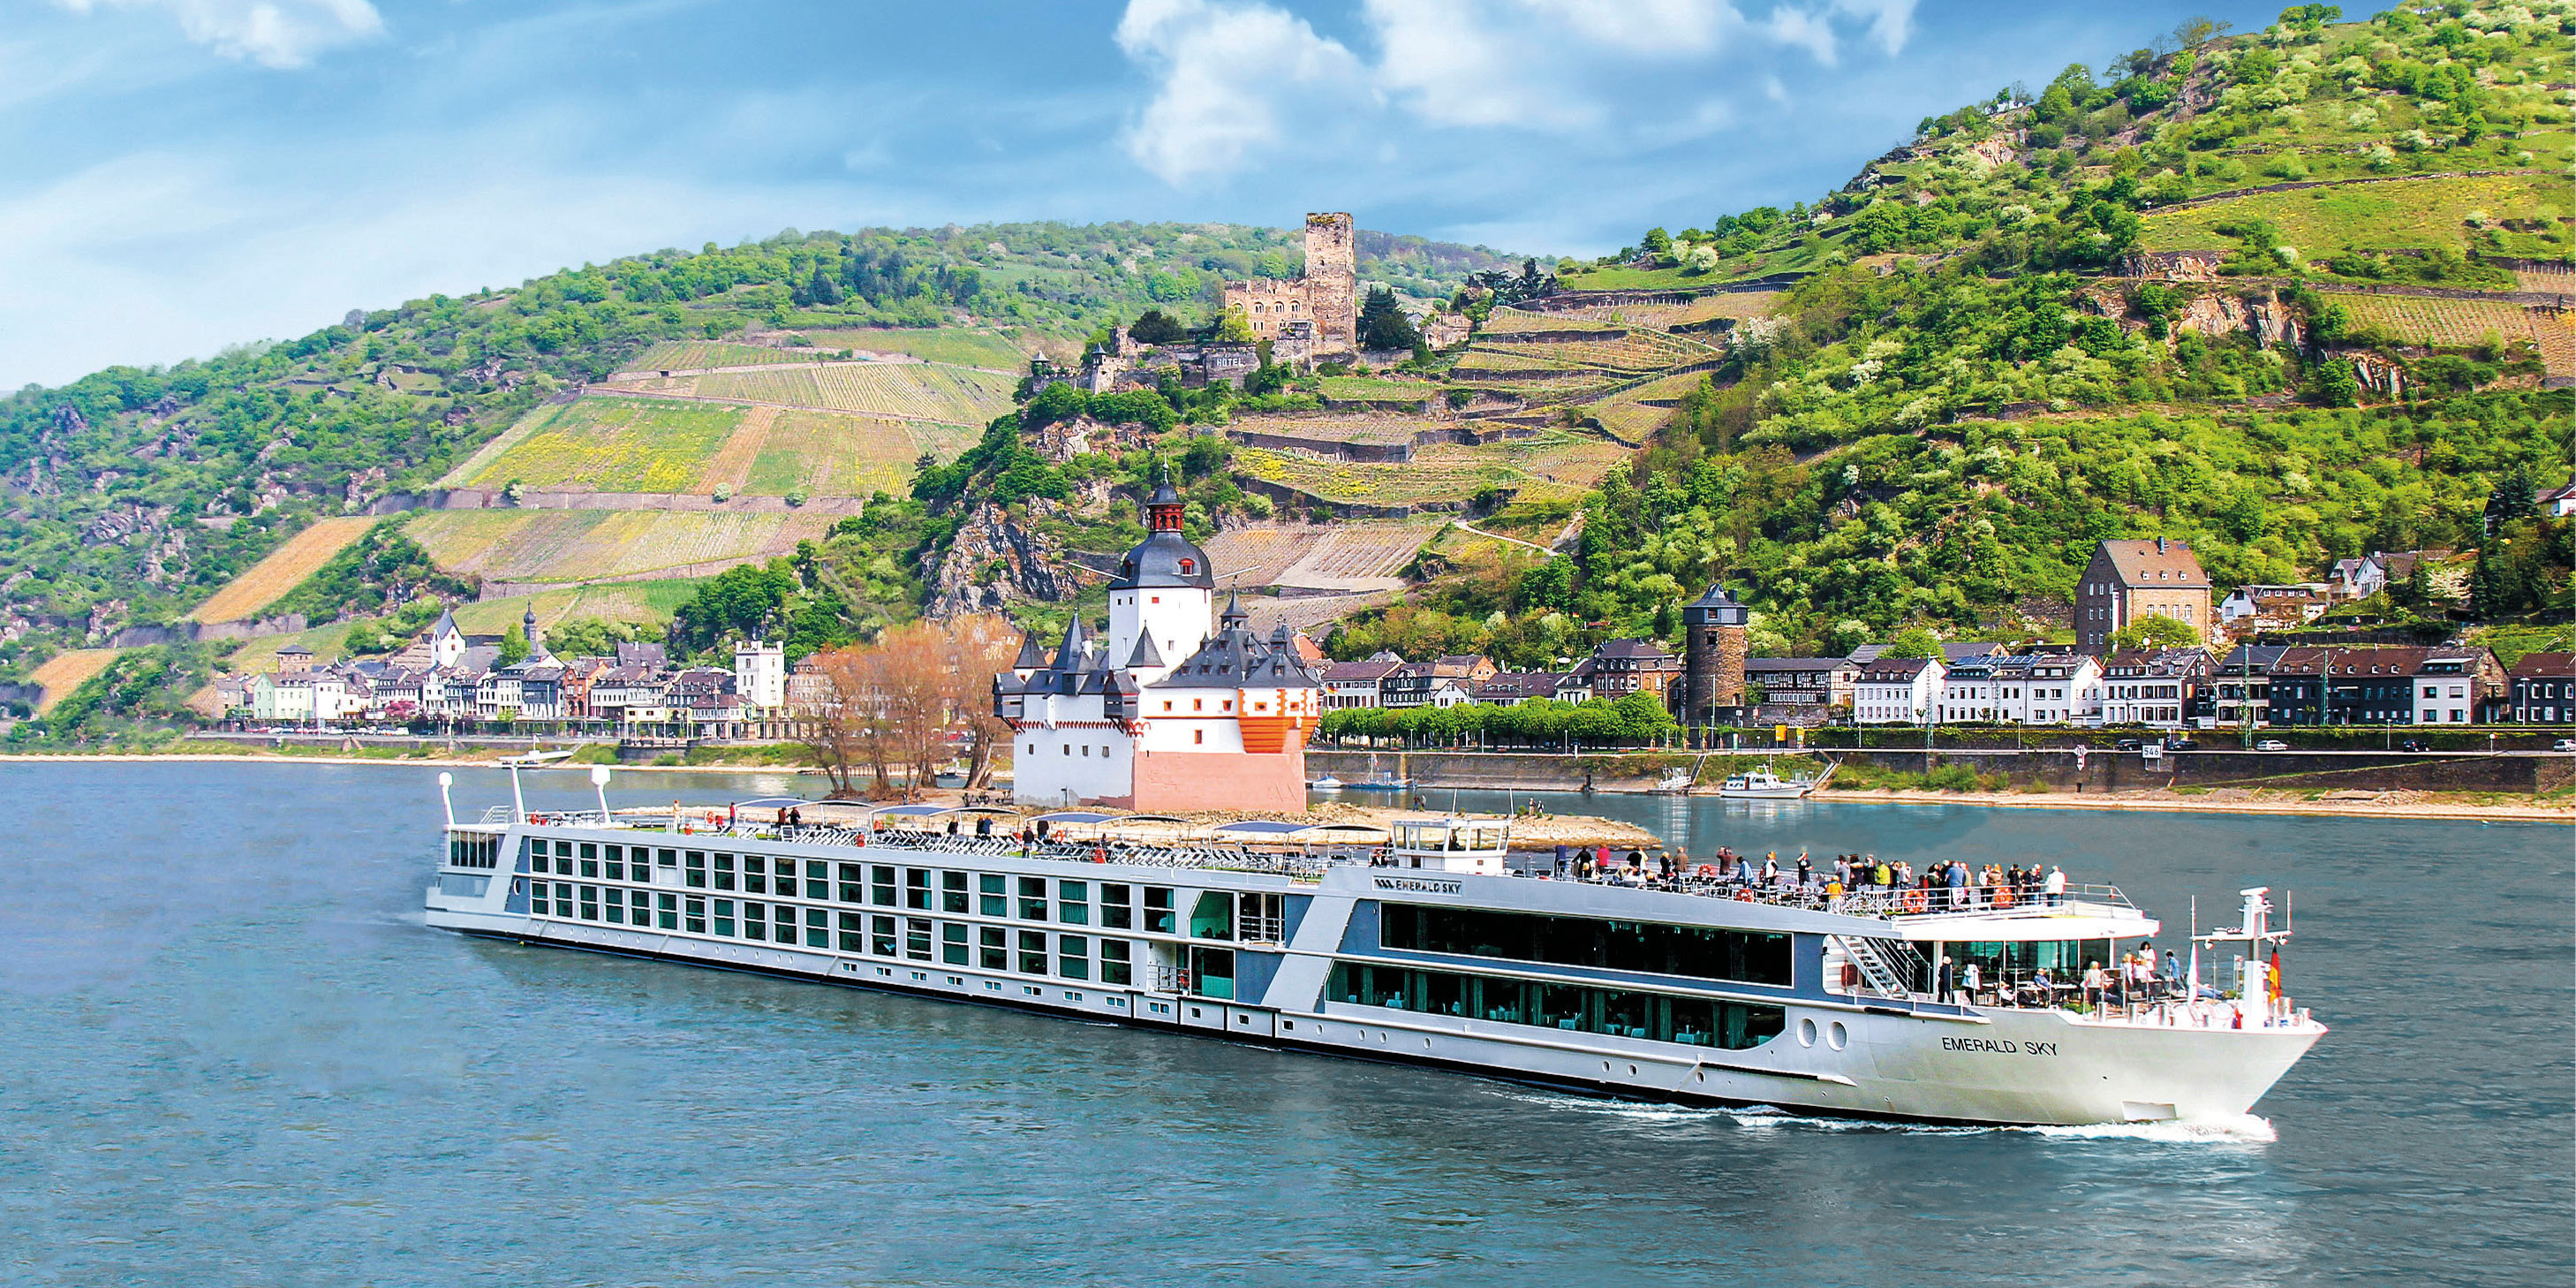  Luxury river ship sailing down the Rhine River   Title: Navigating the rivers of Europe 